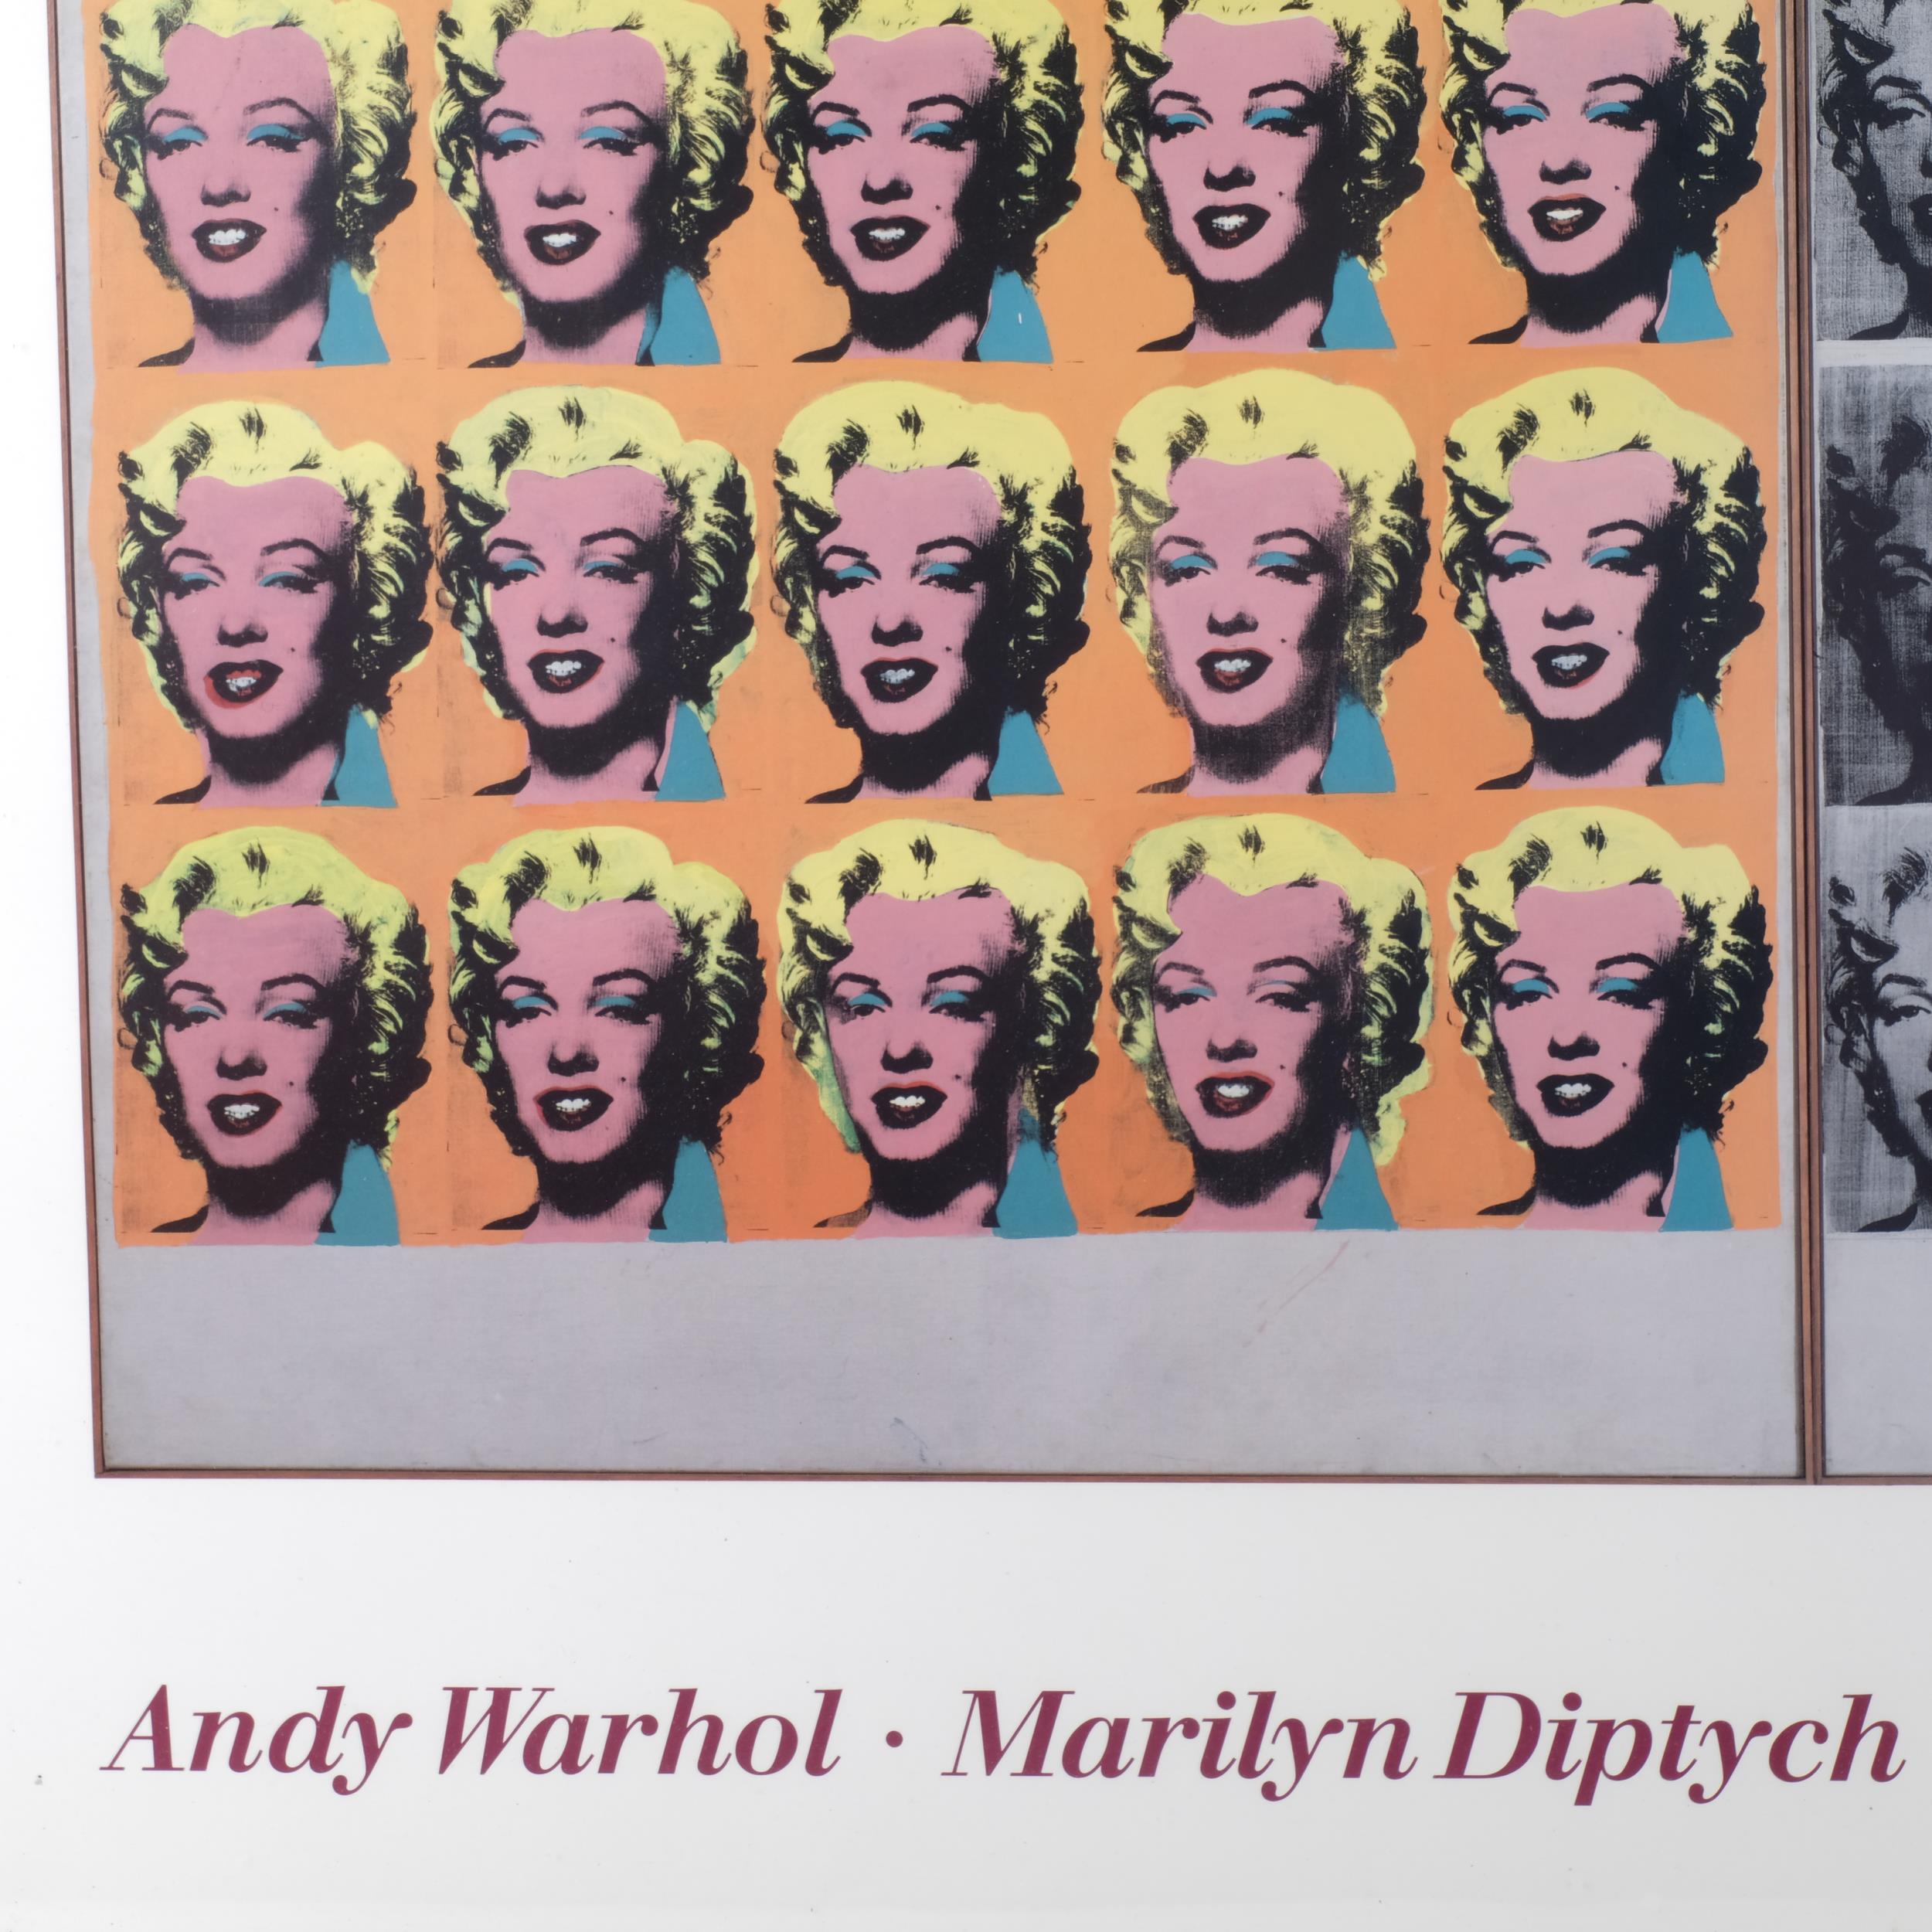 After Andy Warhol, Marilyn Monroe Diptych, a Tate Gallery poster, framed, 73 x 103cm Good condition - Bild 2 aus 2